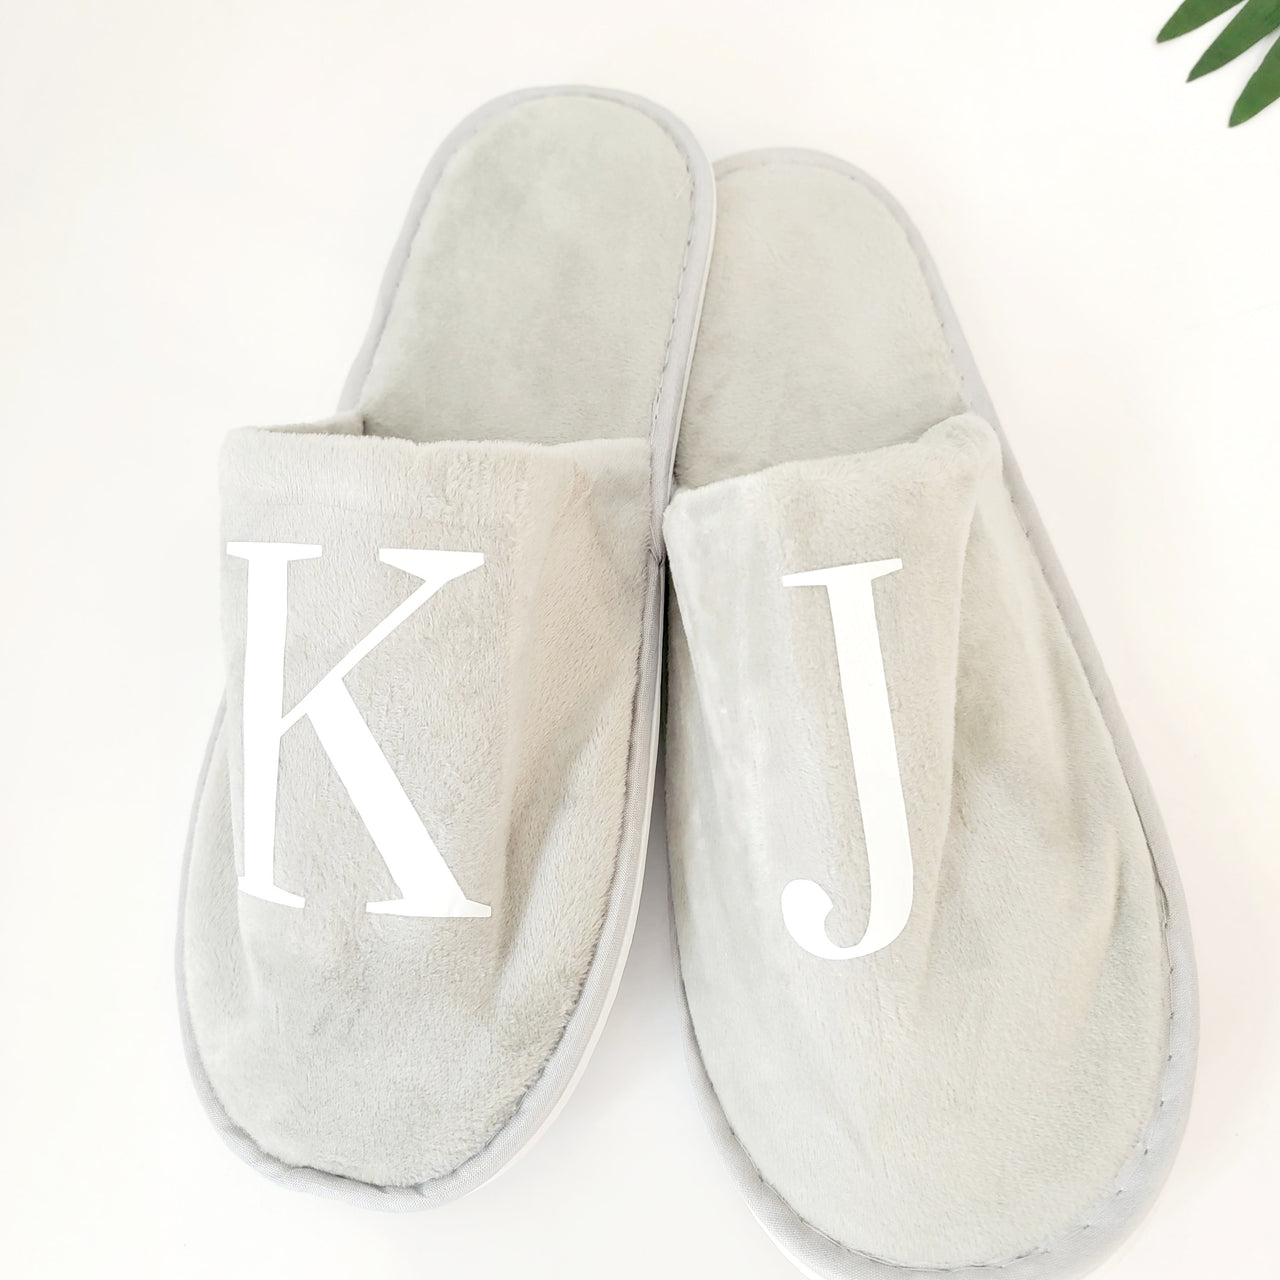 Personalized Guest Slippers Set - Monogrammed Houseguest Slippers - Bridesmaids Slippers - Hotel Spa Slippers - Airbnb Slippers Set